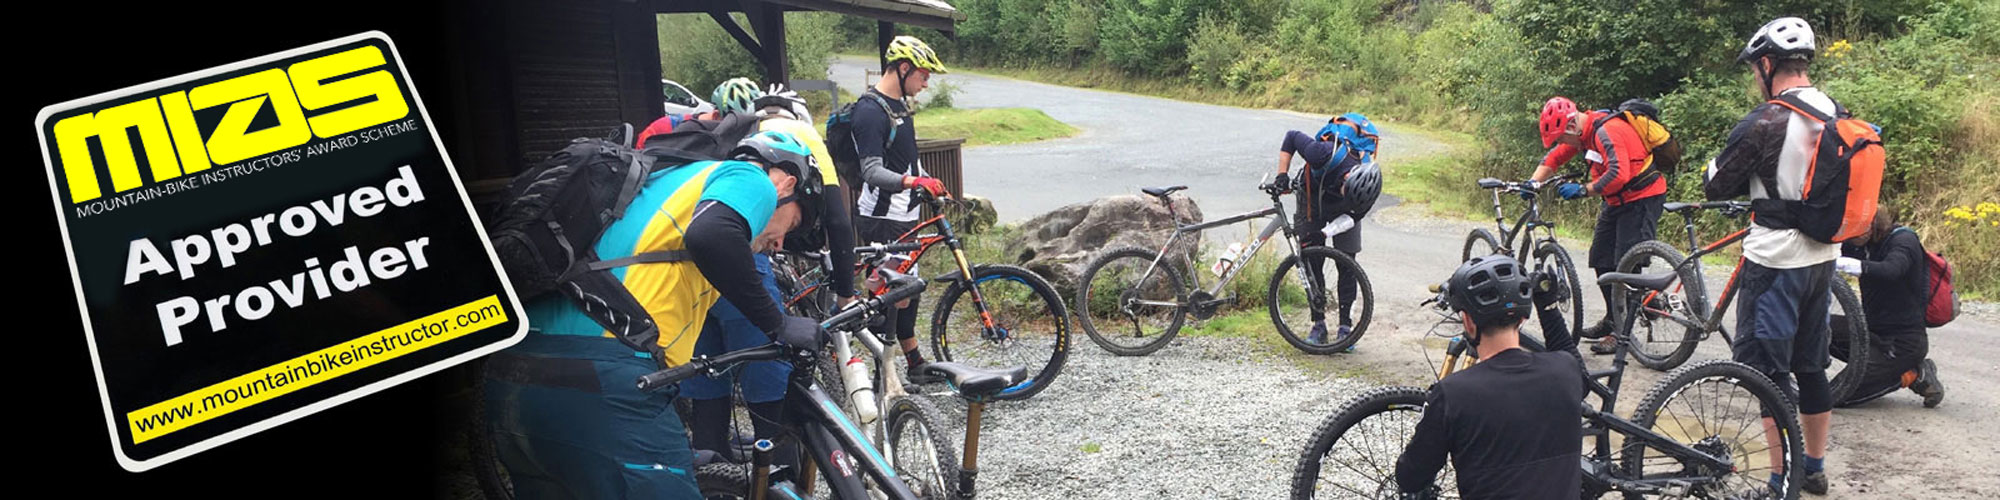 MIAS Approved Provider of mountain biking training courses